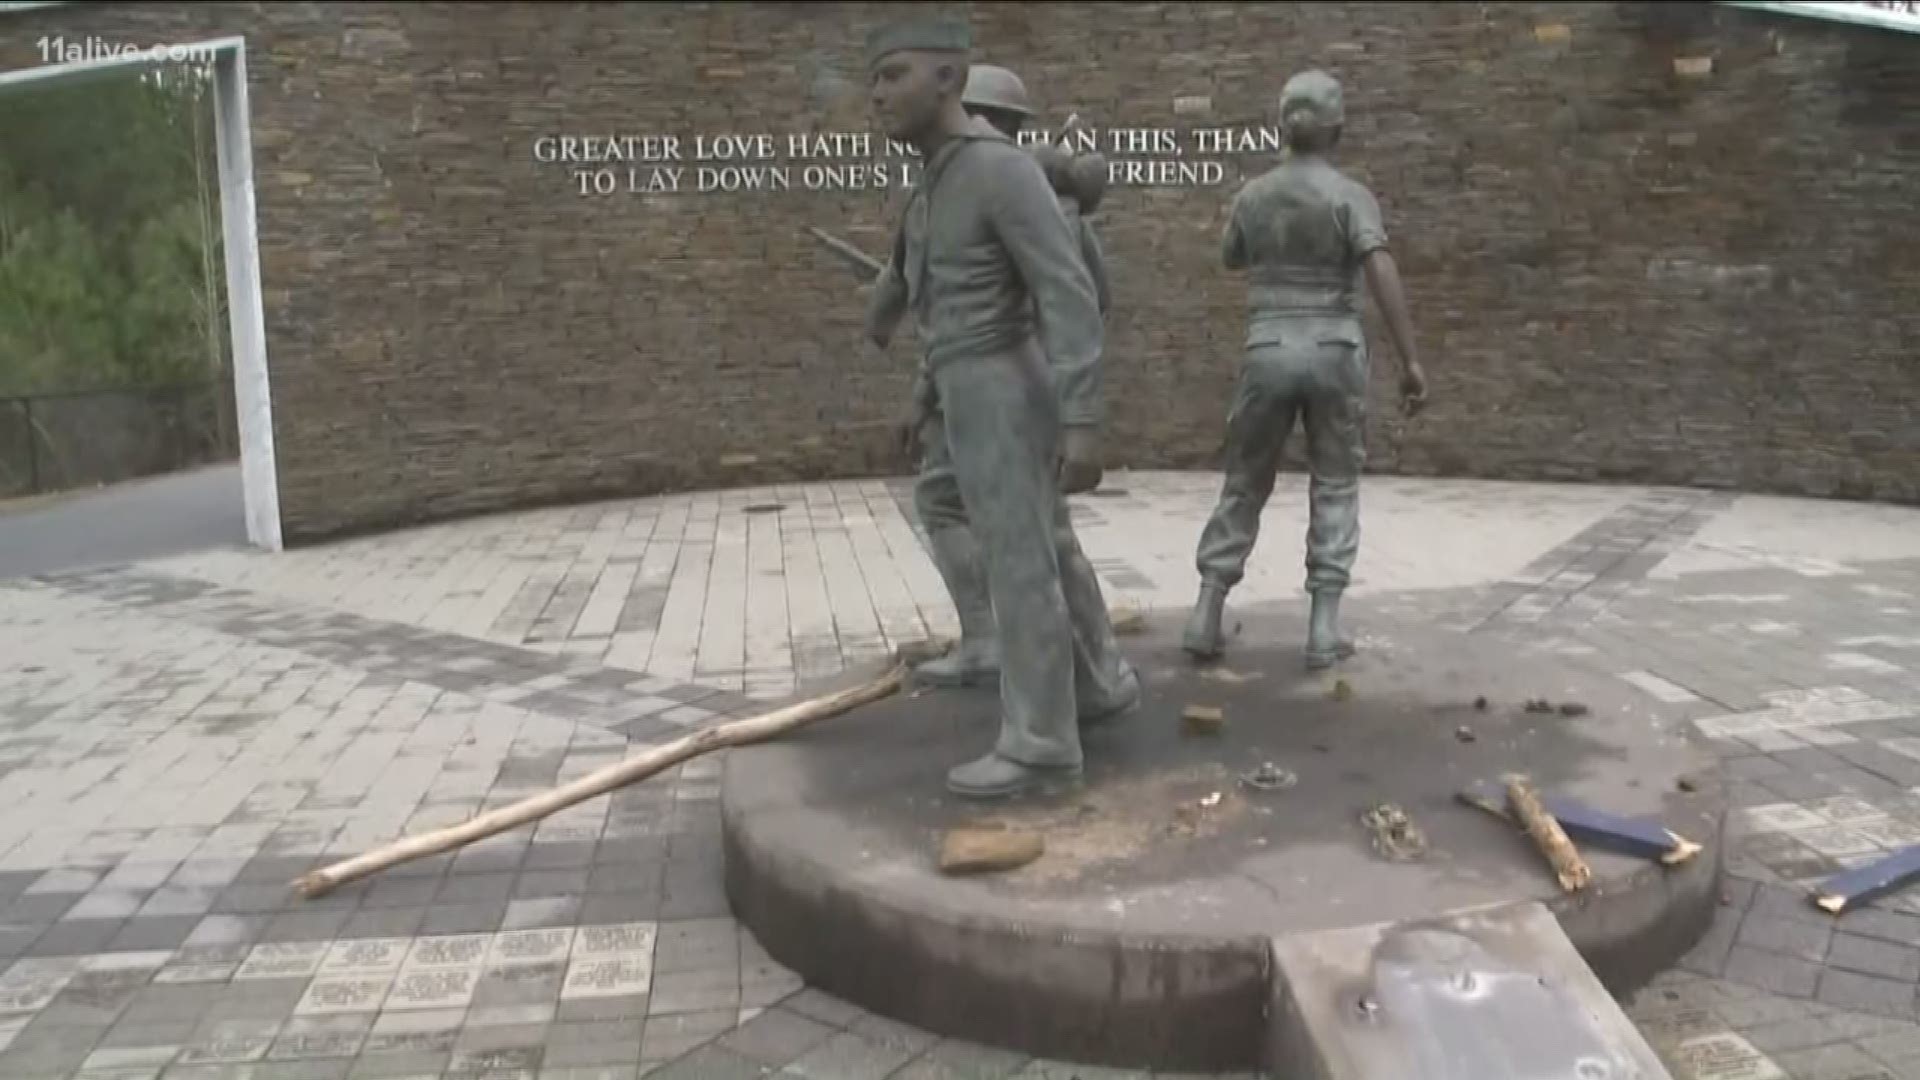 In 2017, suspects broke into The Walk of Heroes Memorial at Black Shoals Park.